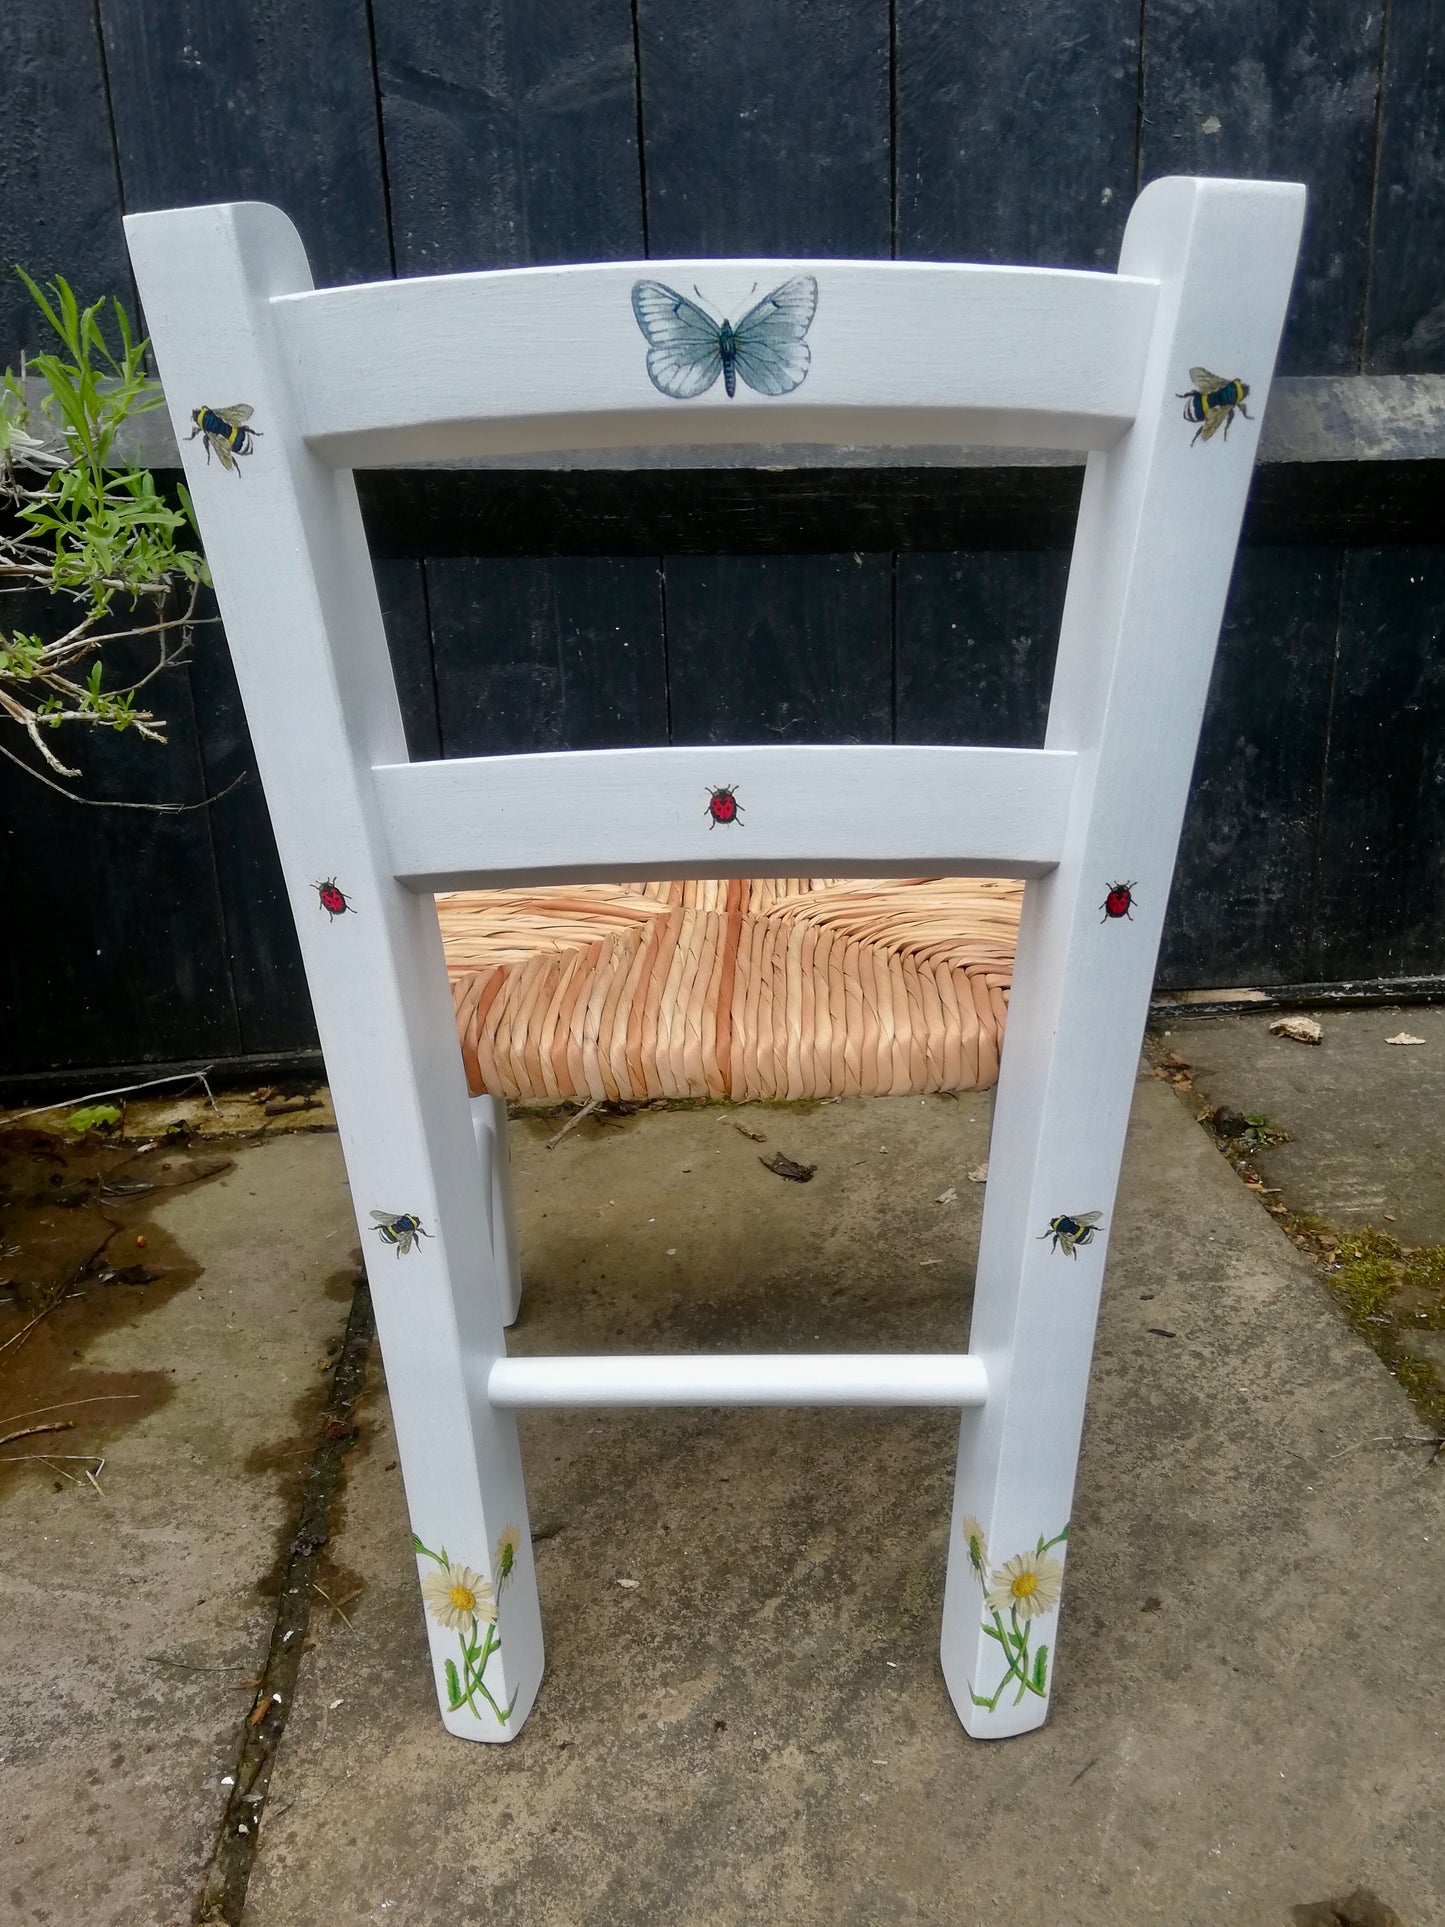 Rush seat personalised children's chair - bees and butterfly theme - made to order